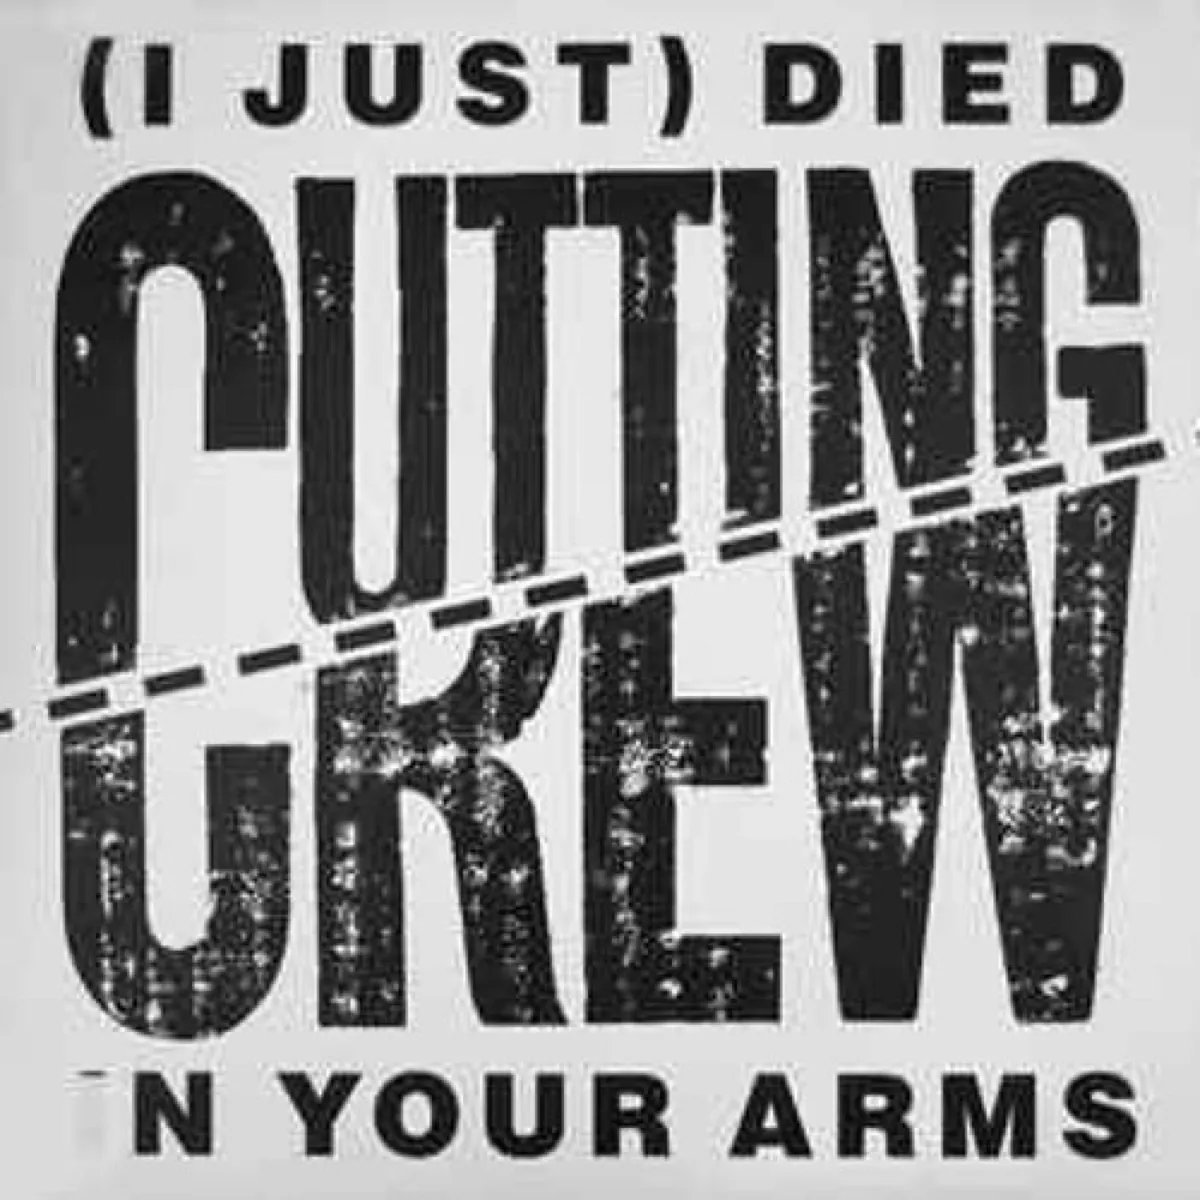 I Just Died In Your Arms Tonight by Cutting Crew